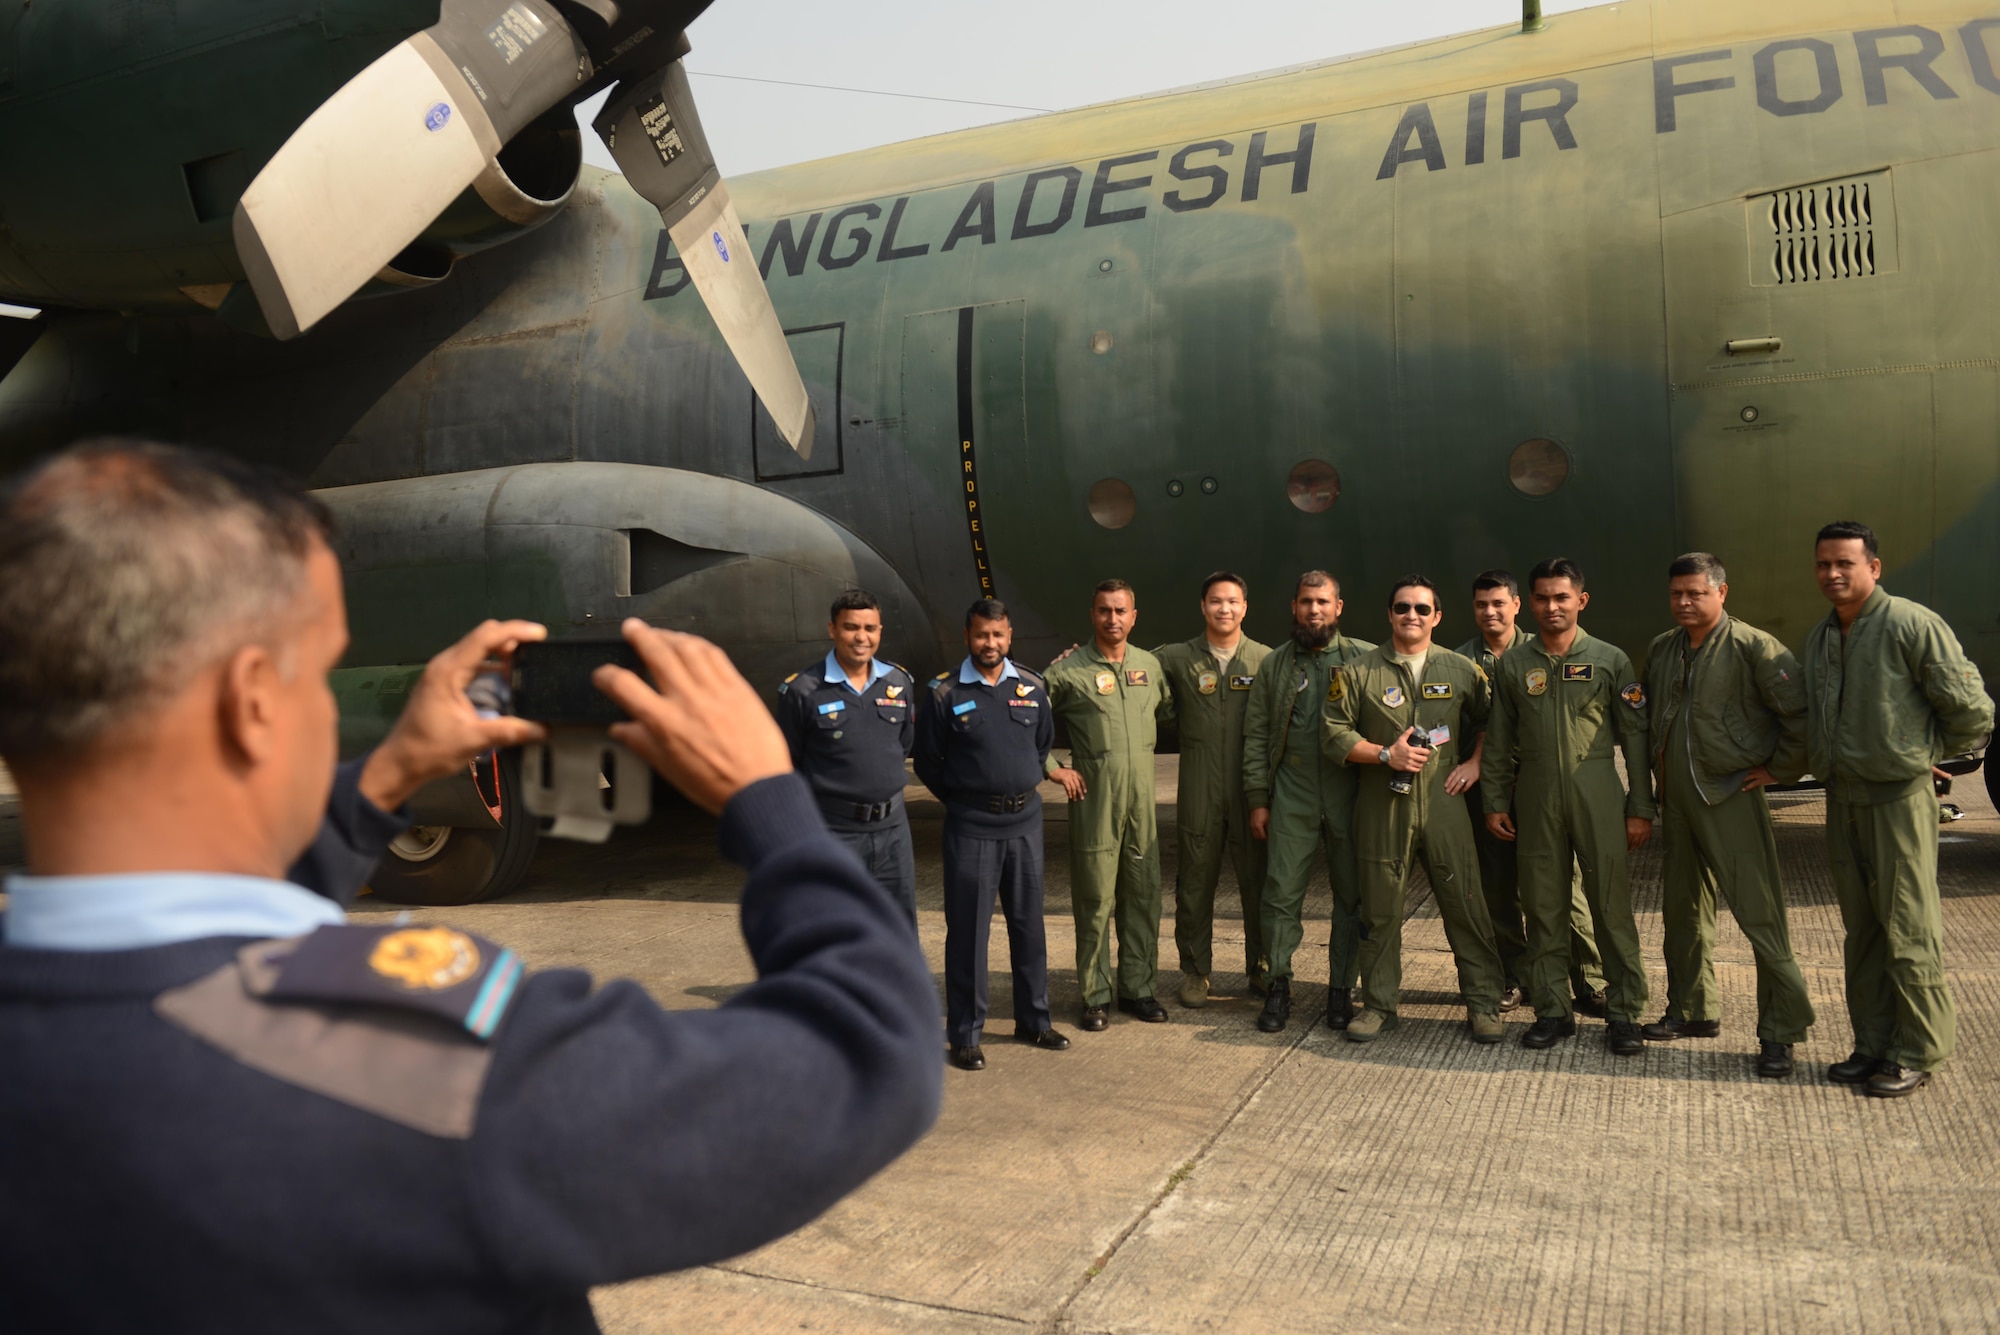 U.S. and Bangladesh air force (BAF) personnel take a group photo in front of a BAF C-130B aircraft Jan. 27, 2015, during exercise Cope South 15 (CS15) at BAF Base Bangabandhu. The exercise helped cultivate common bonds, foster goodwill, and improve readiness and compatibility between members of the Bangladesh and U.S. air forces. CS15 is a Pacific Air Forces-sponsored, bilateral tactical airlift exercise conducted in Bangladesh, with a focus on cooperative flight operations, day and night low-level navigation, tactical airdrop, and air-land missions as well as subject matter expert exchanges in the fields of operations, maintenance and rigging disciplines. (U.S. Air Force photo/1st Lt. Jake Bailey)